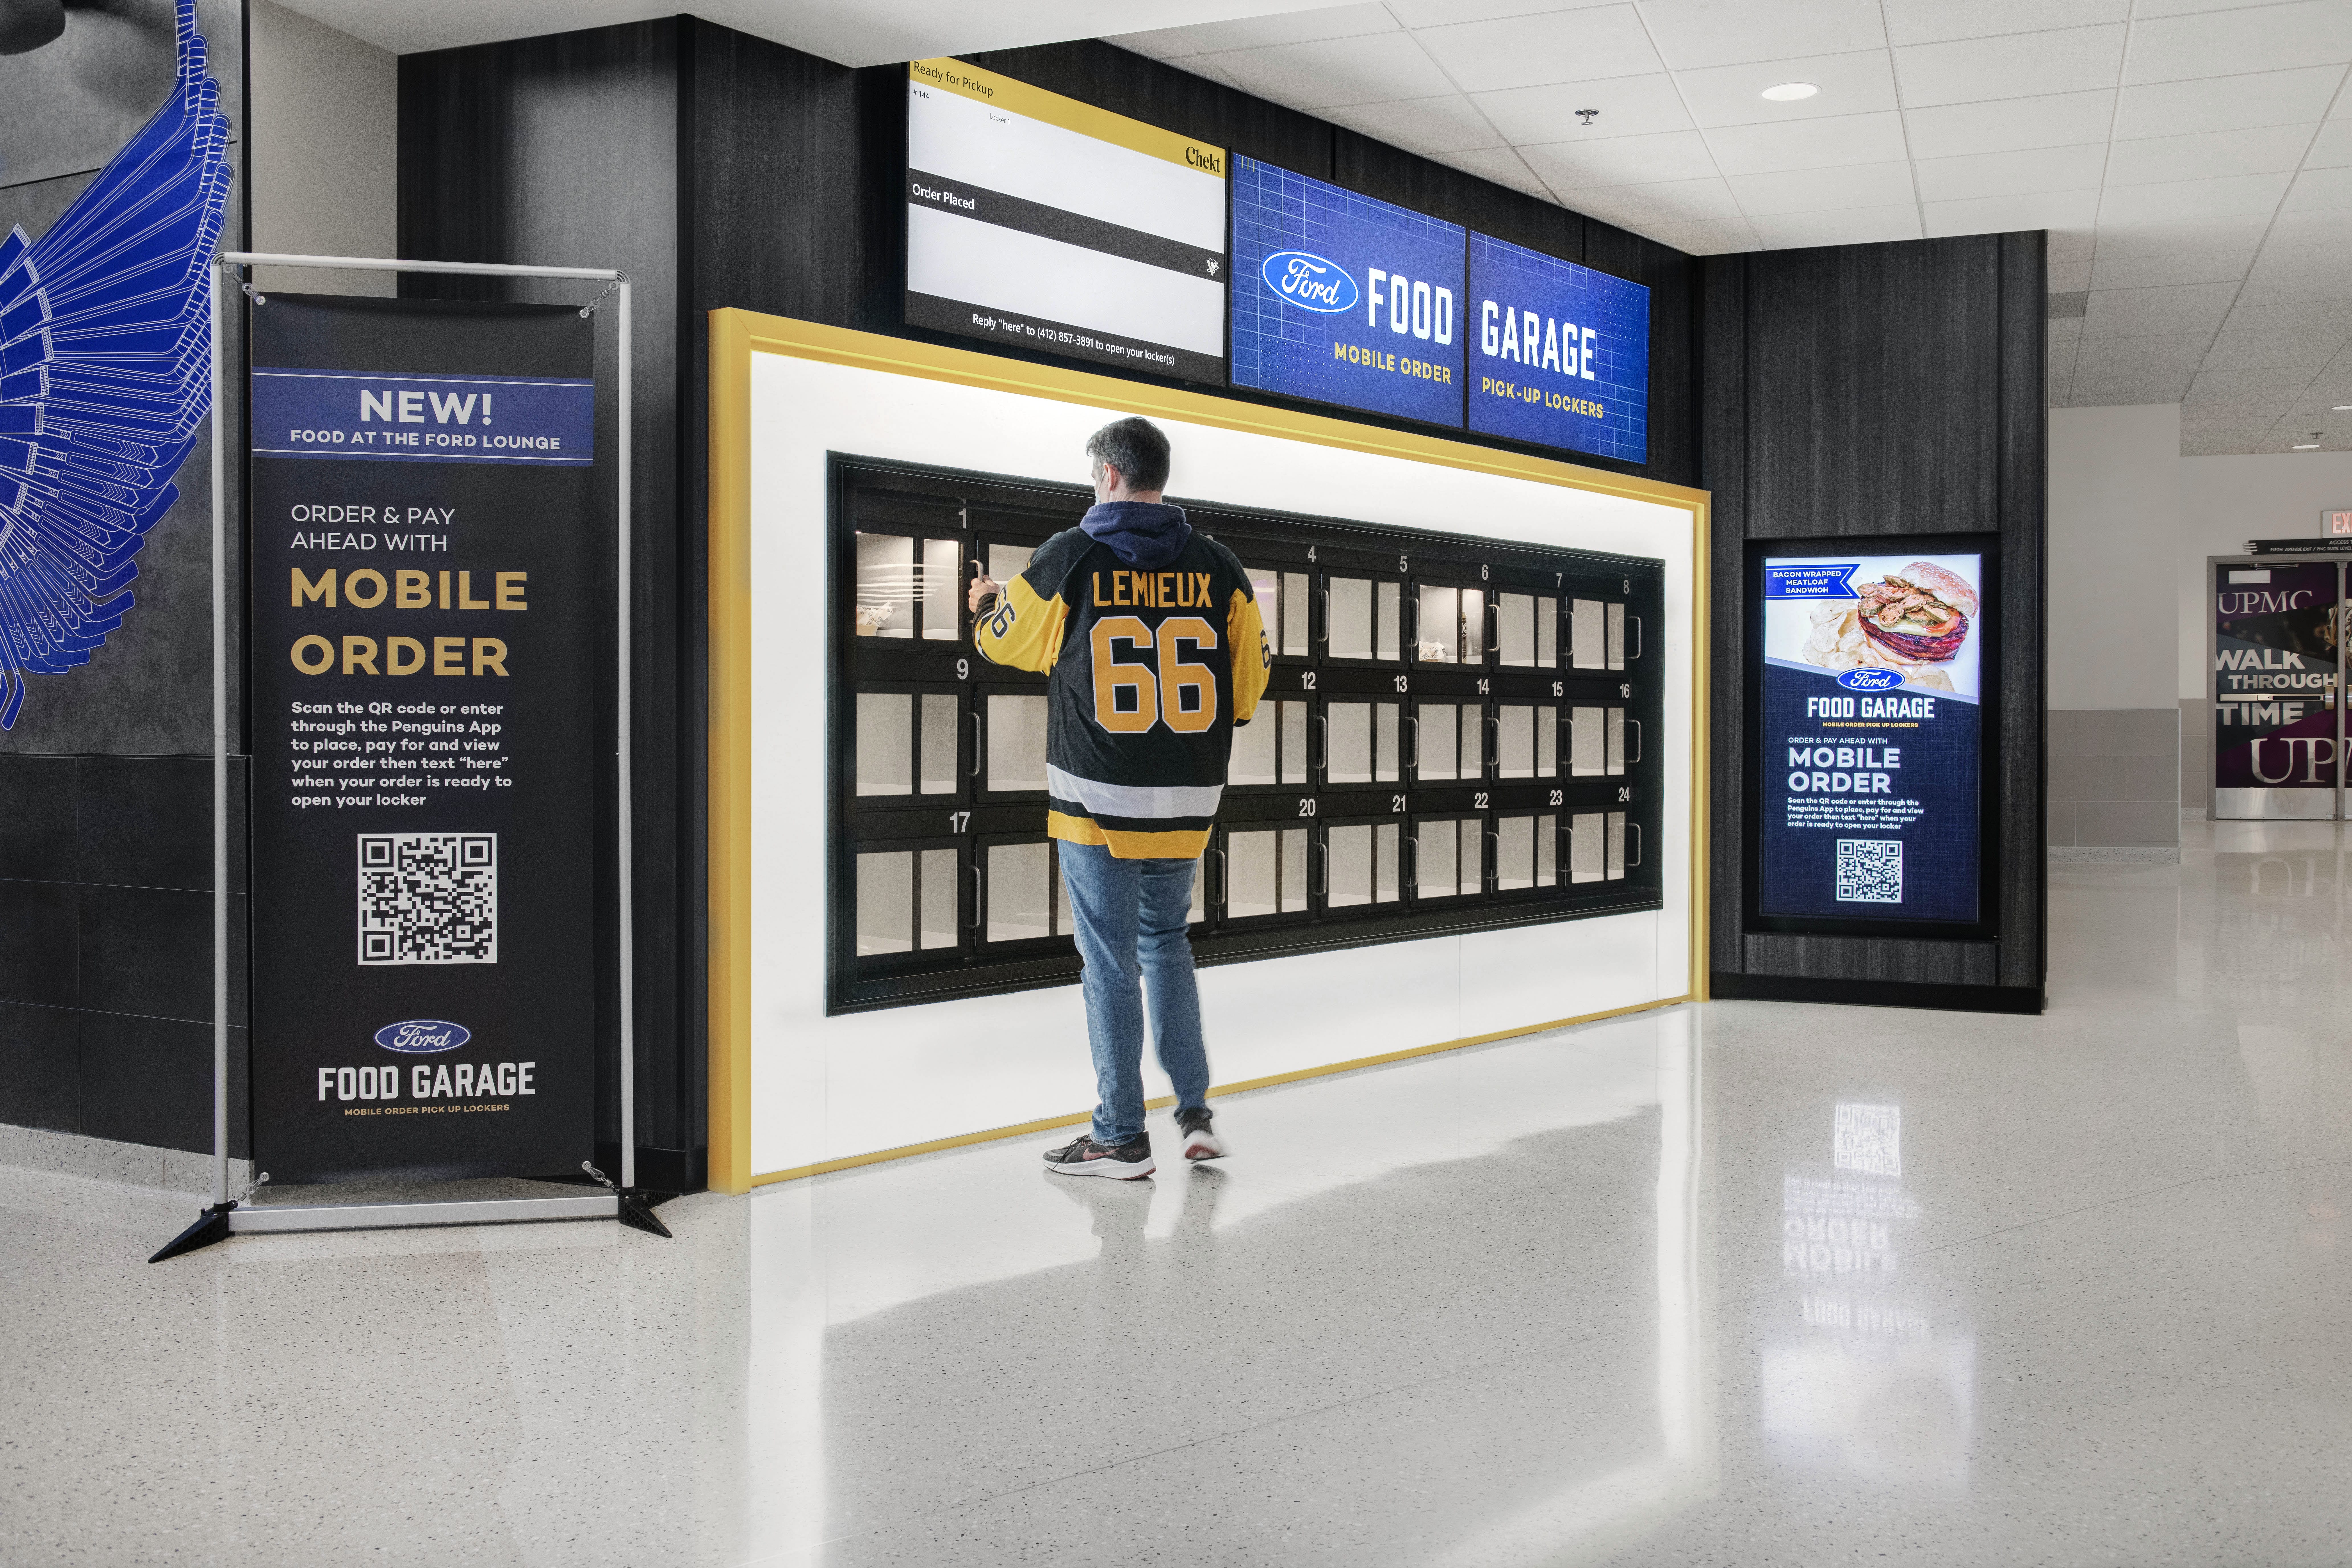 WATCH: Inside PPG Paints Arena, changes to fan experience